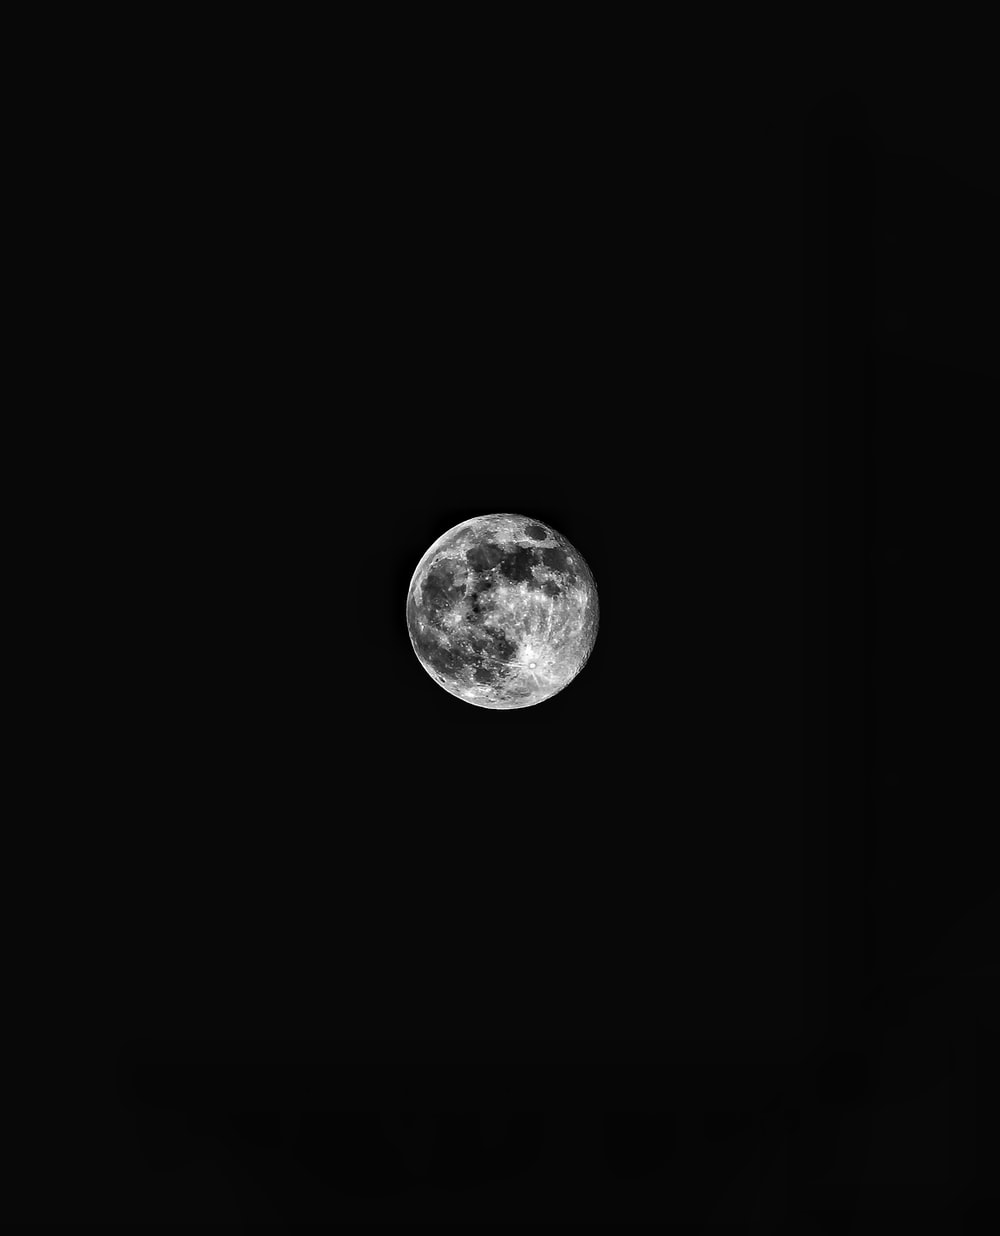 Black Moon Picture. Download Free Image